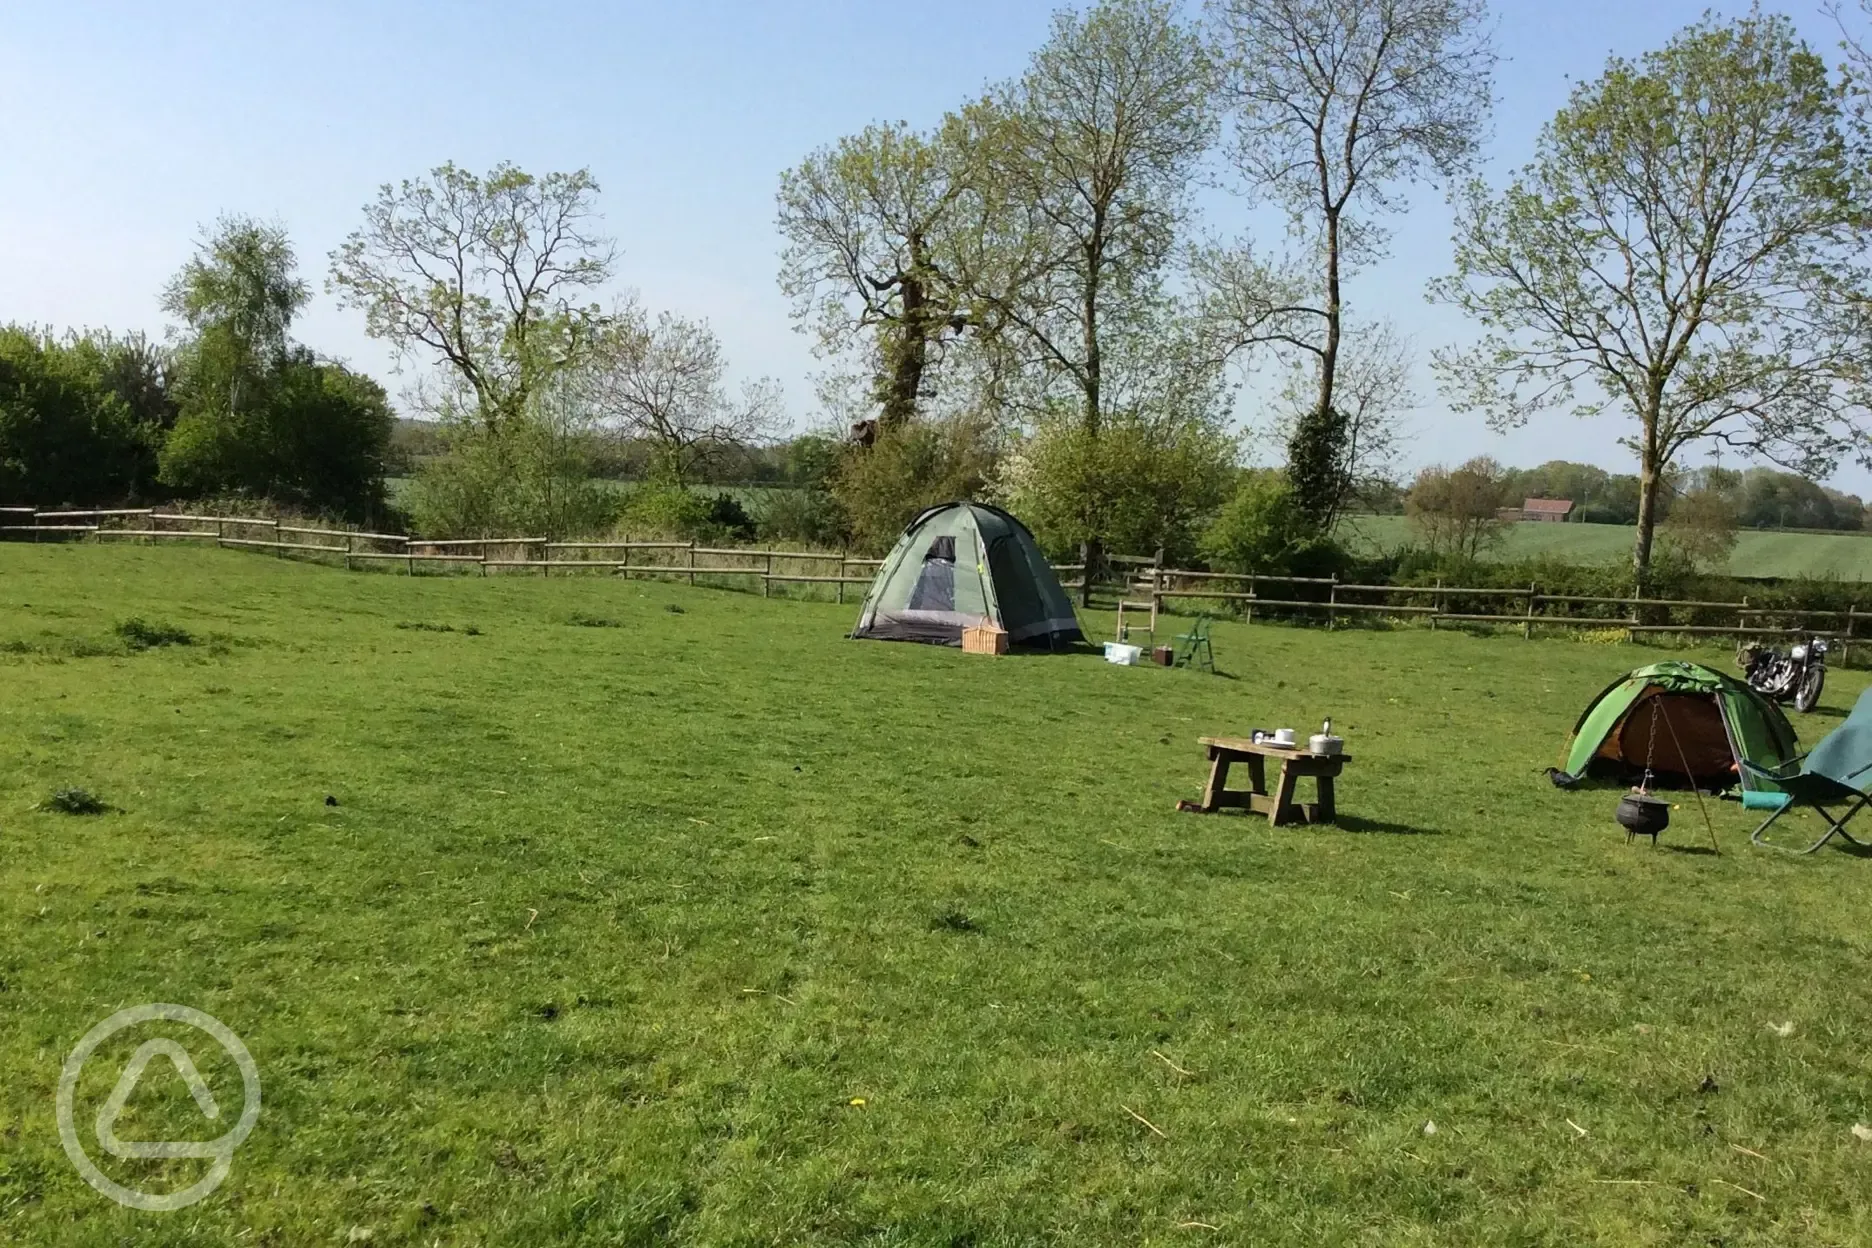 The camping field at Dean House